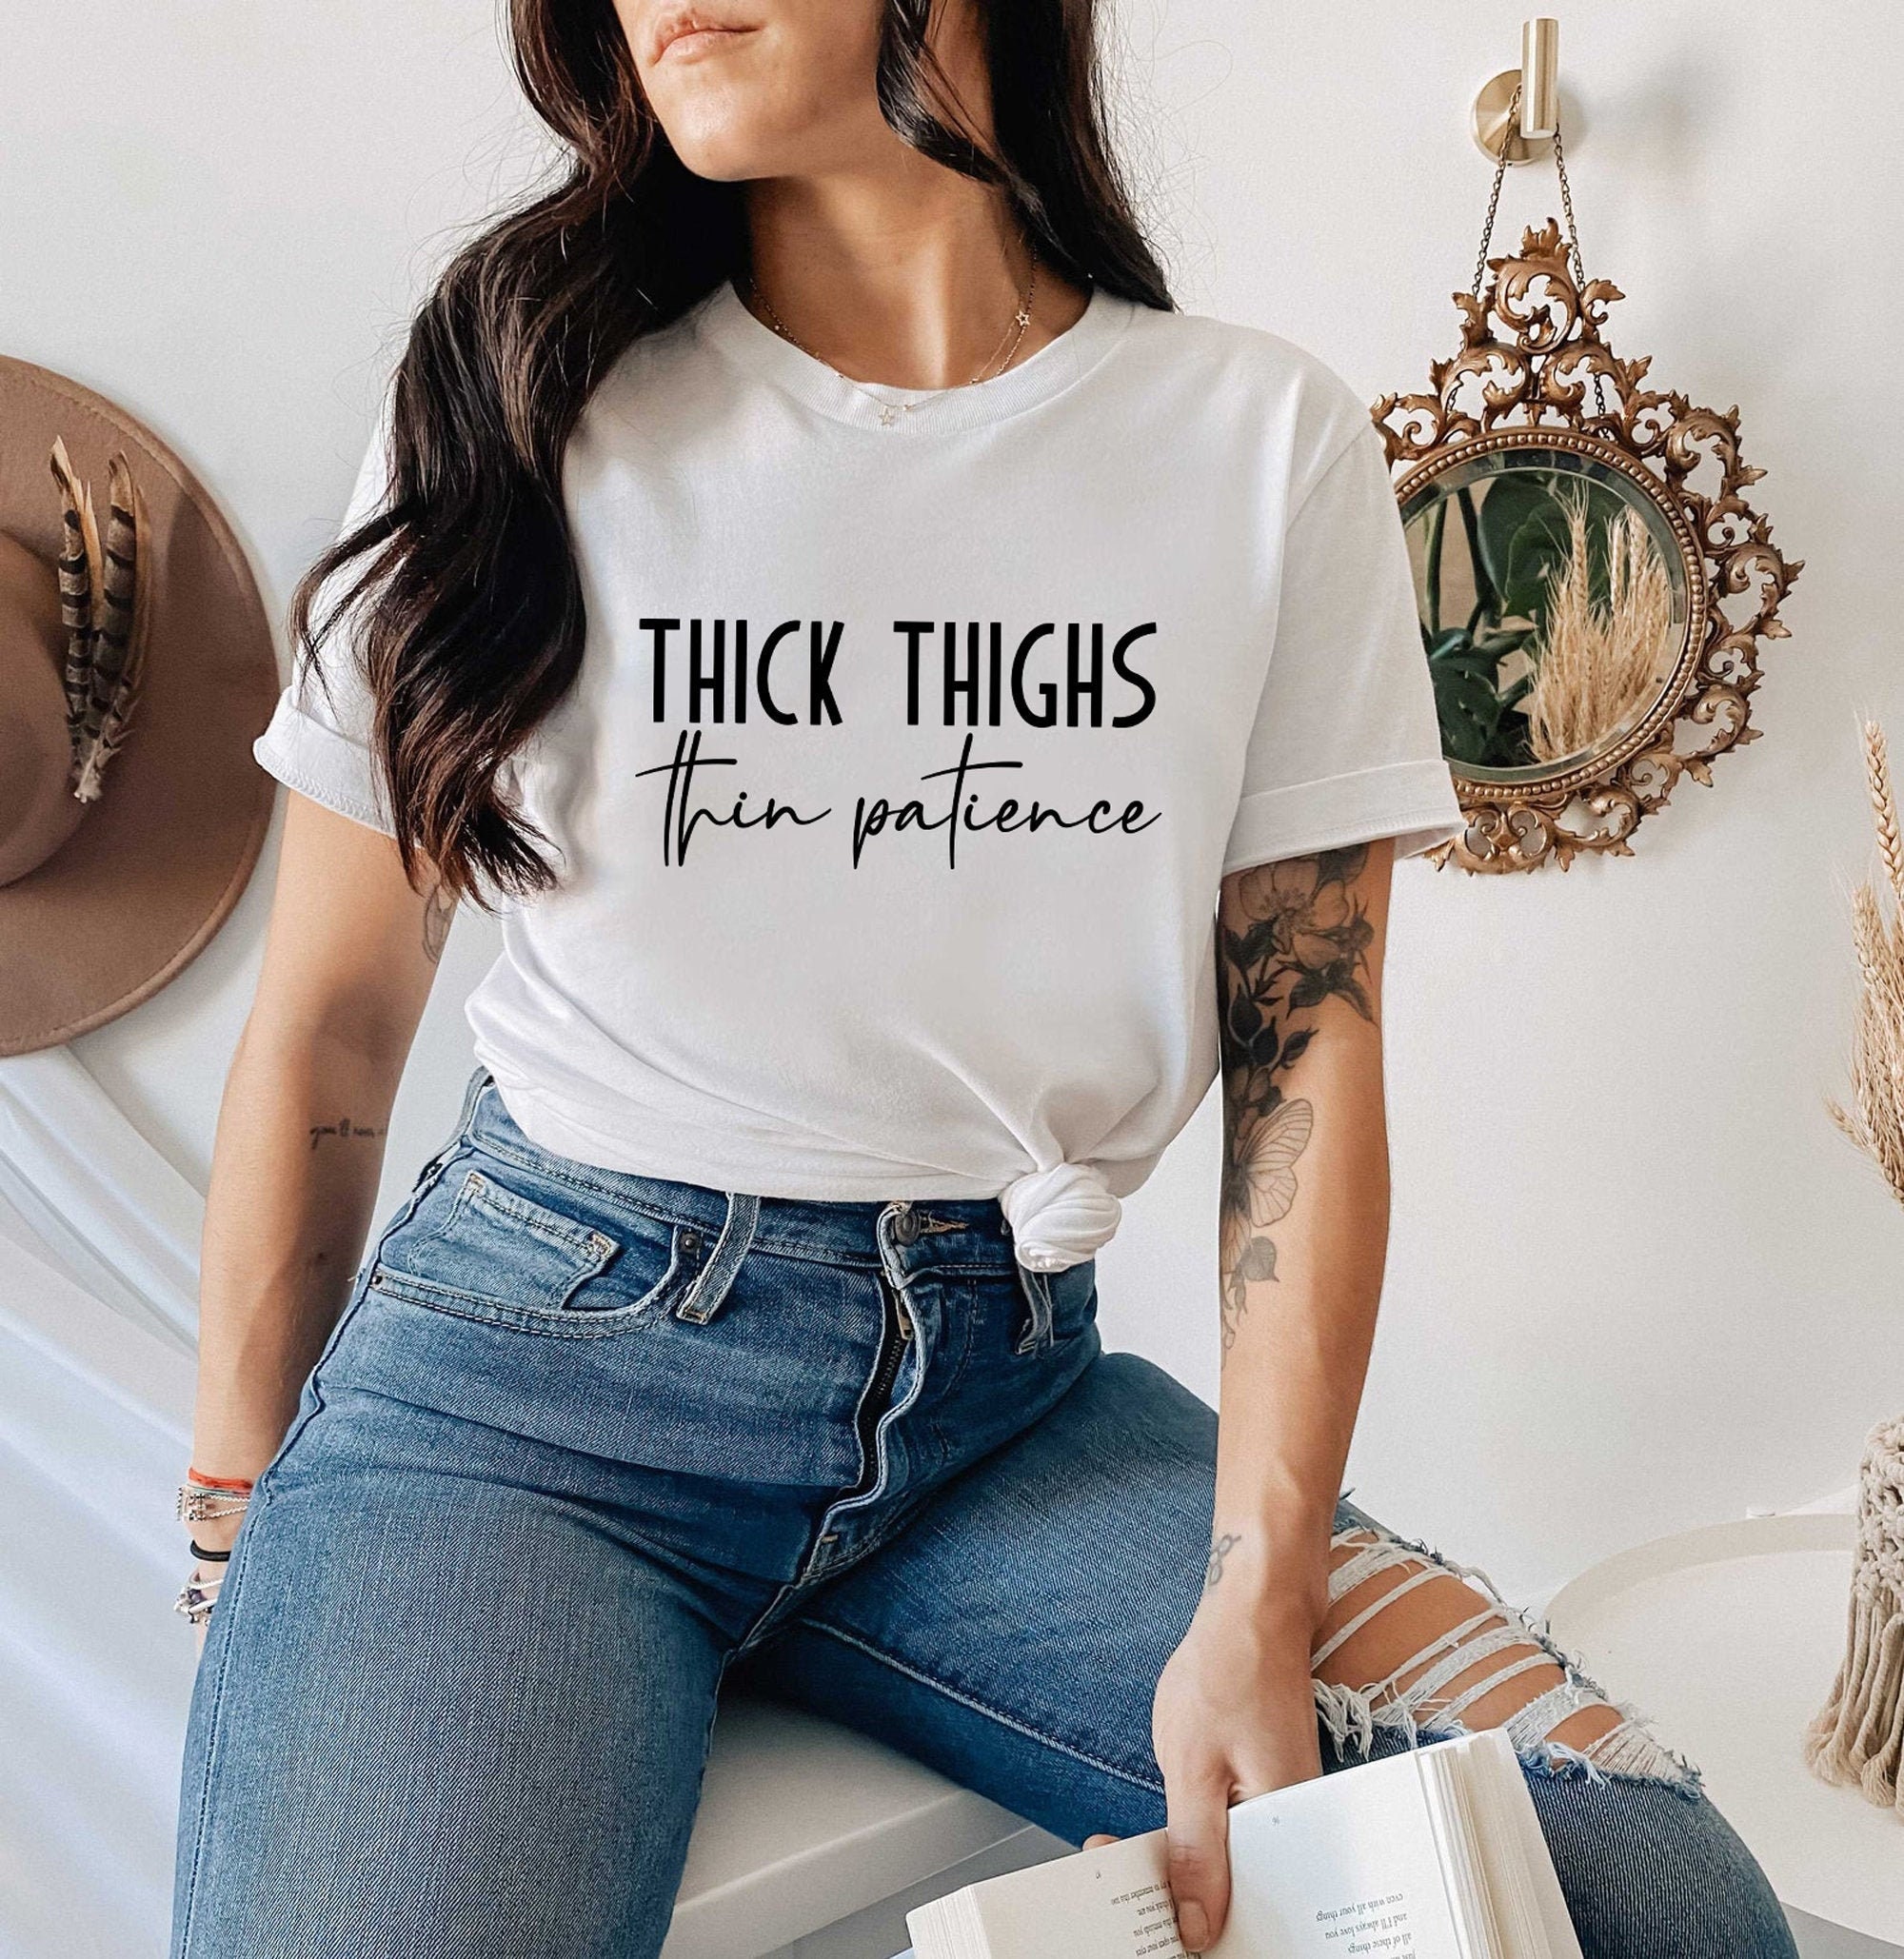 Thick Thighs Thin Patience Shirt sold by Marcelo Martins